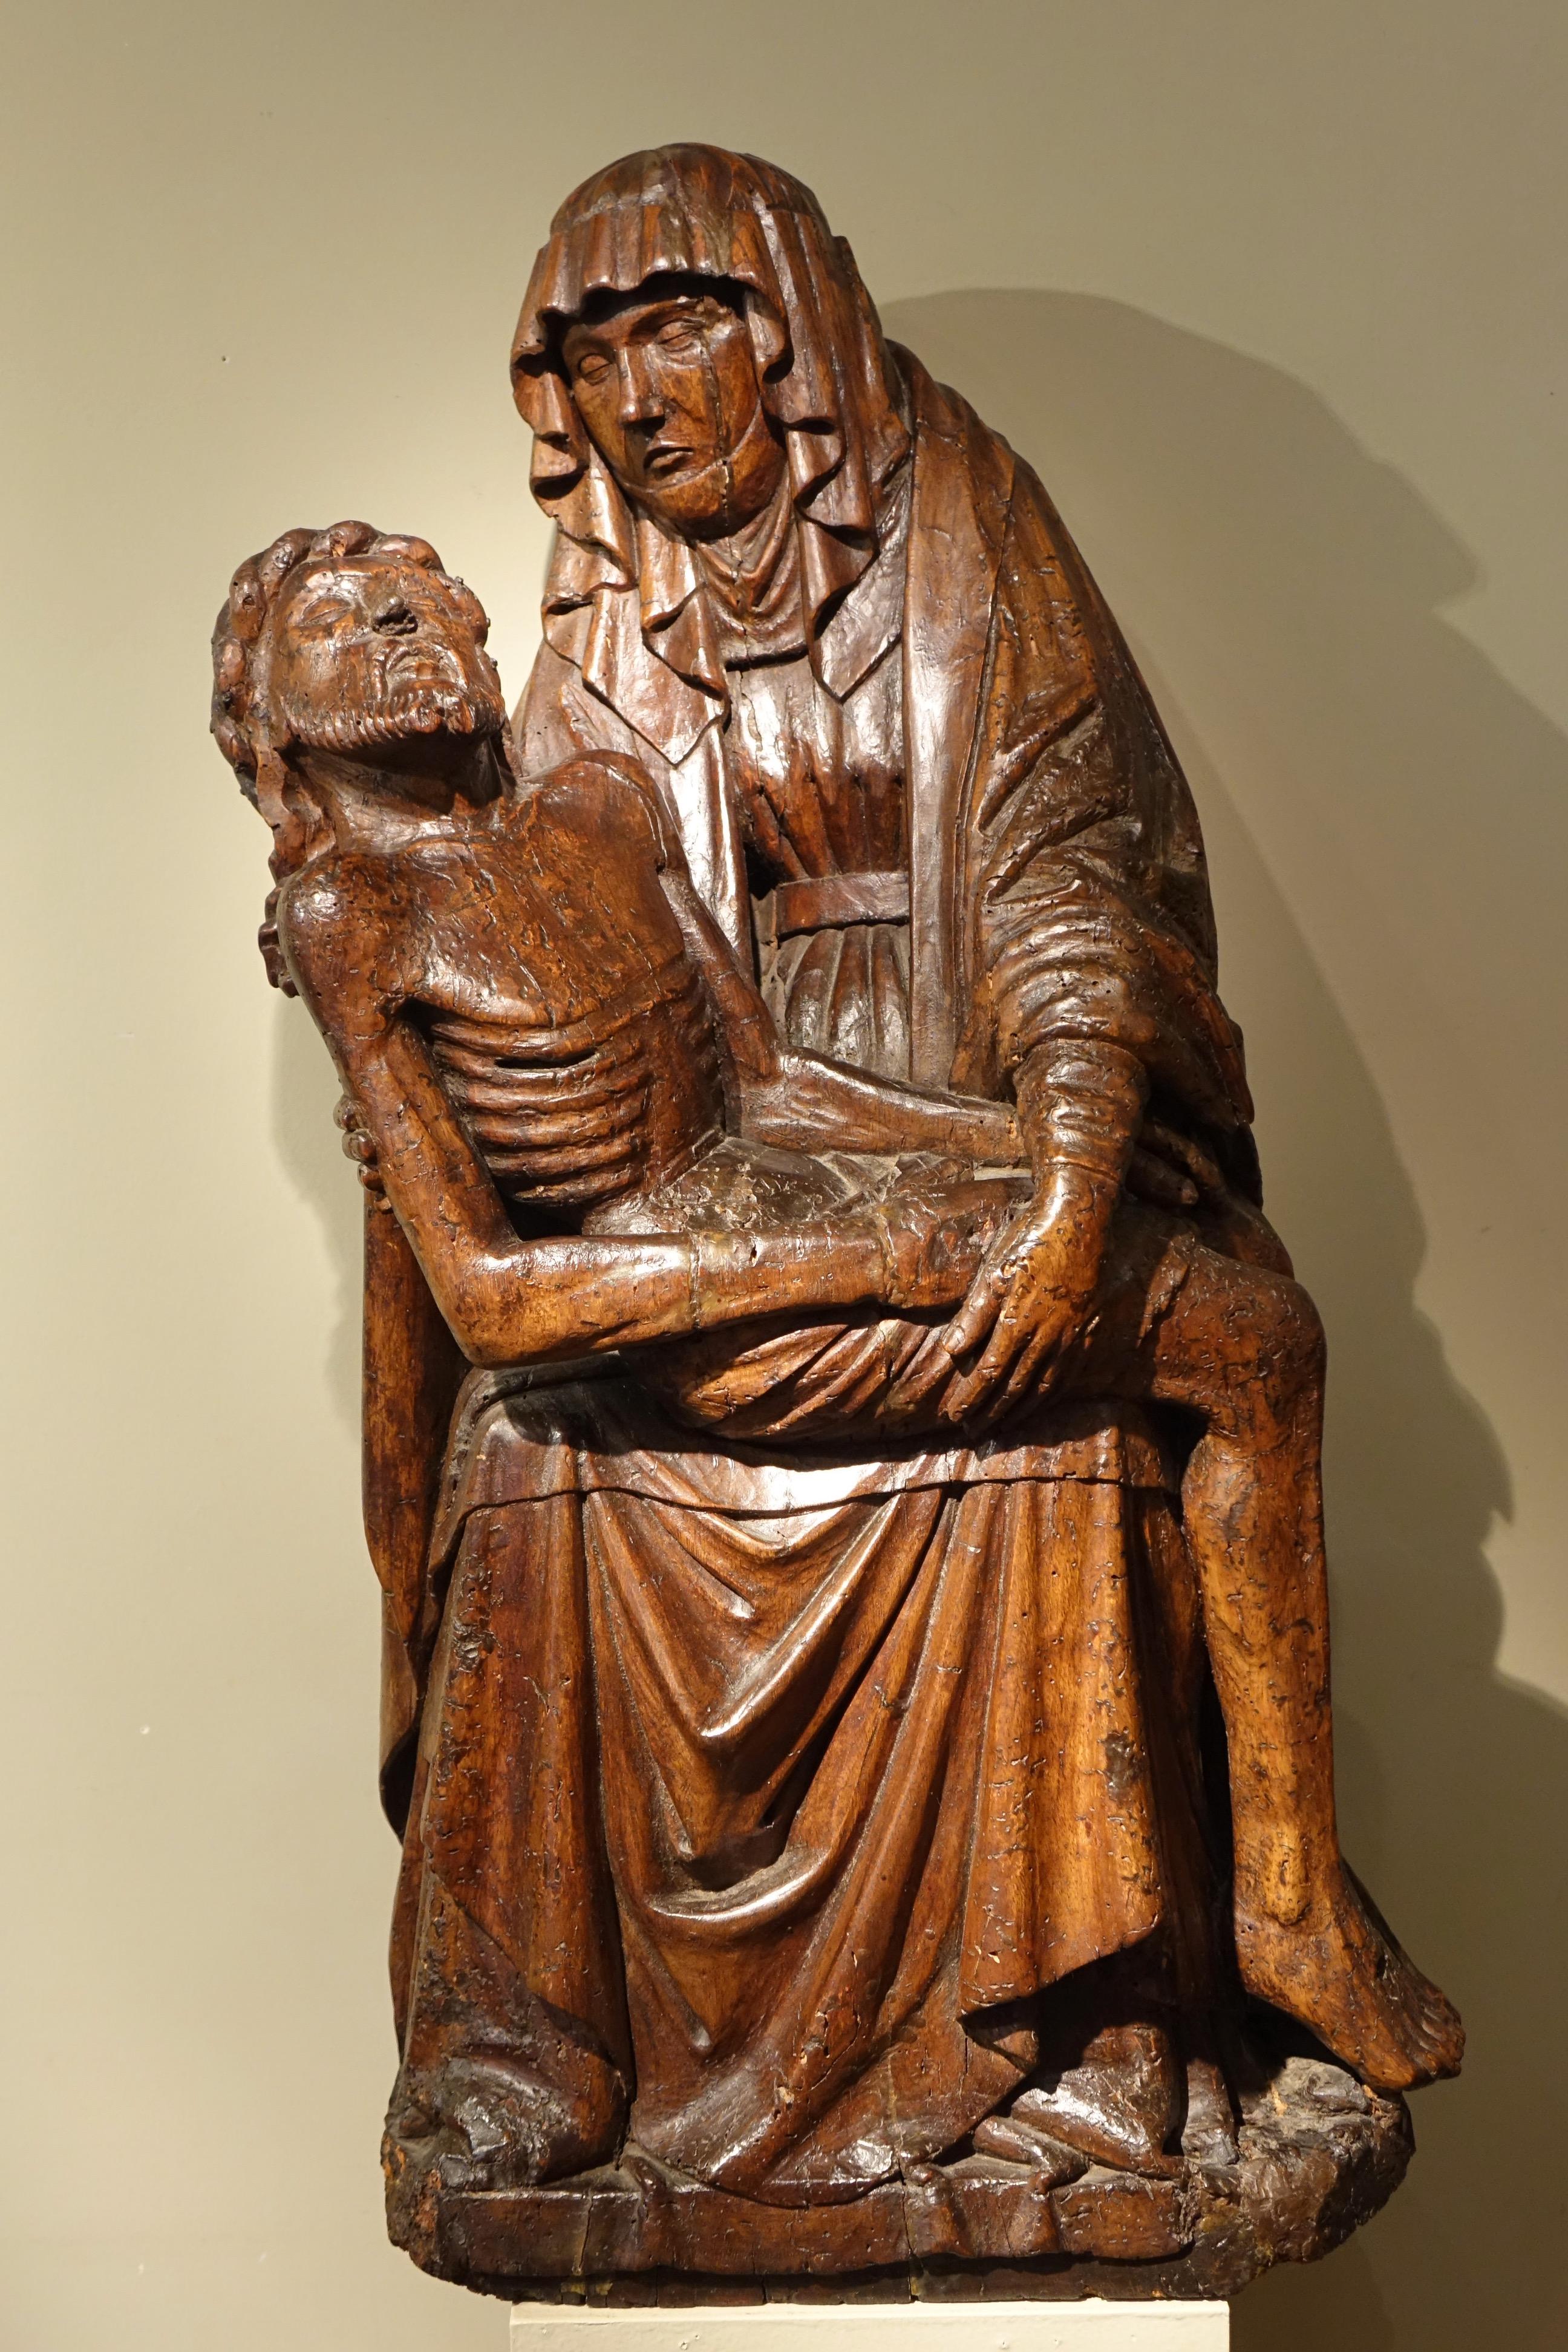 Beautiful and large Pieta, carved in the round in oak.
Mary holds Jesus' body on her knees as he descends from the cross, after his crucifixion and before his burial.
This theme of suffering and death is the first in the order of events after the